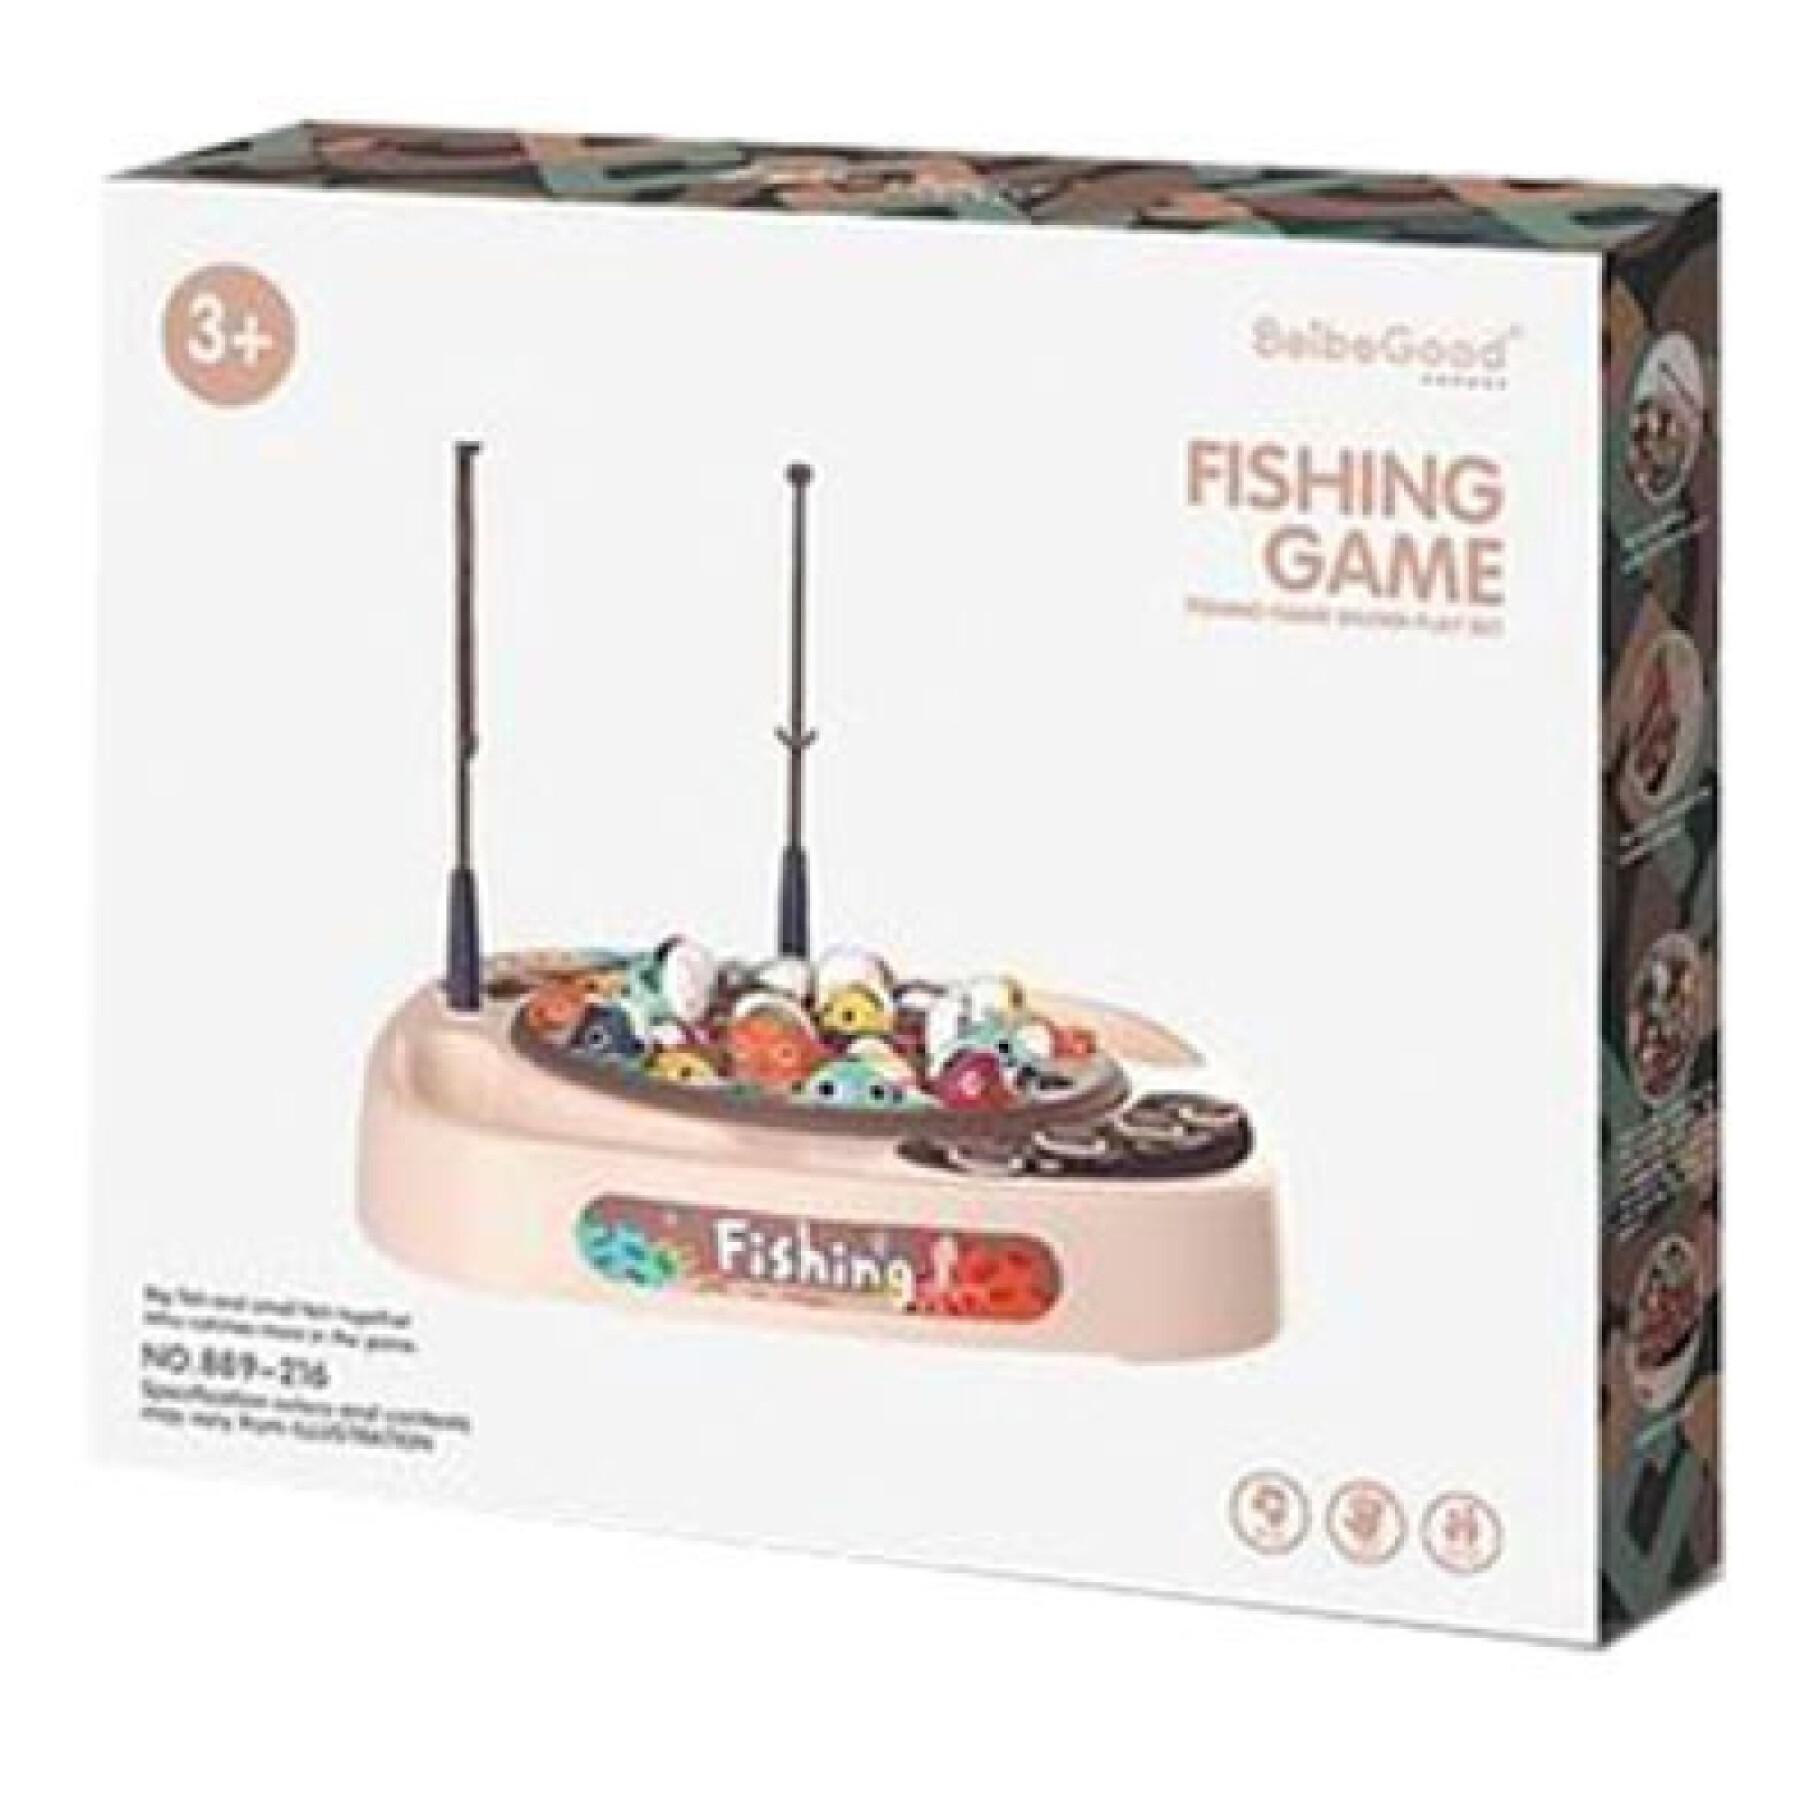 Electric fishing games with 2 assorted colors Fantastiko